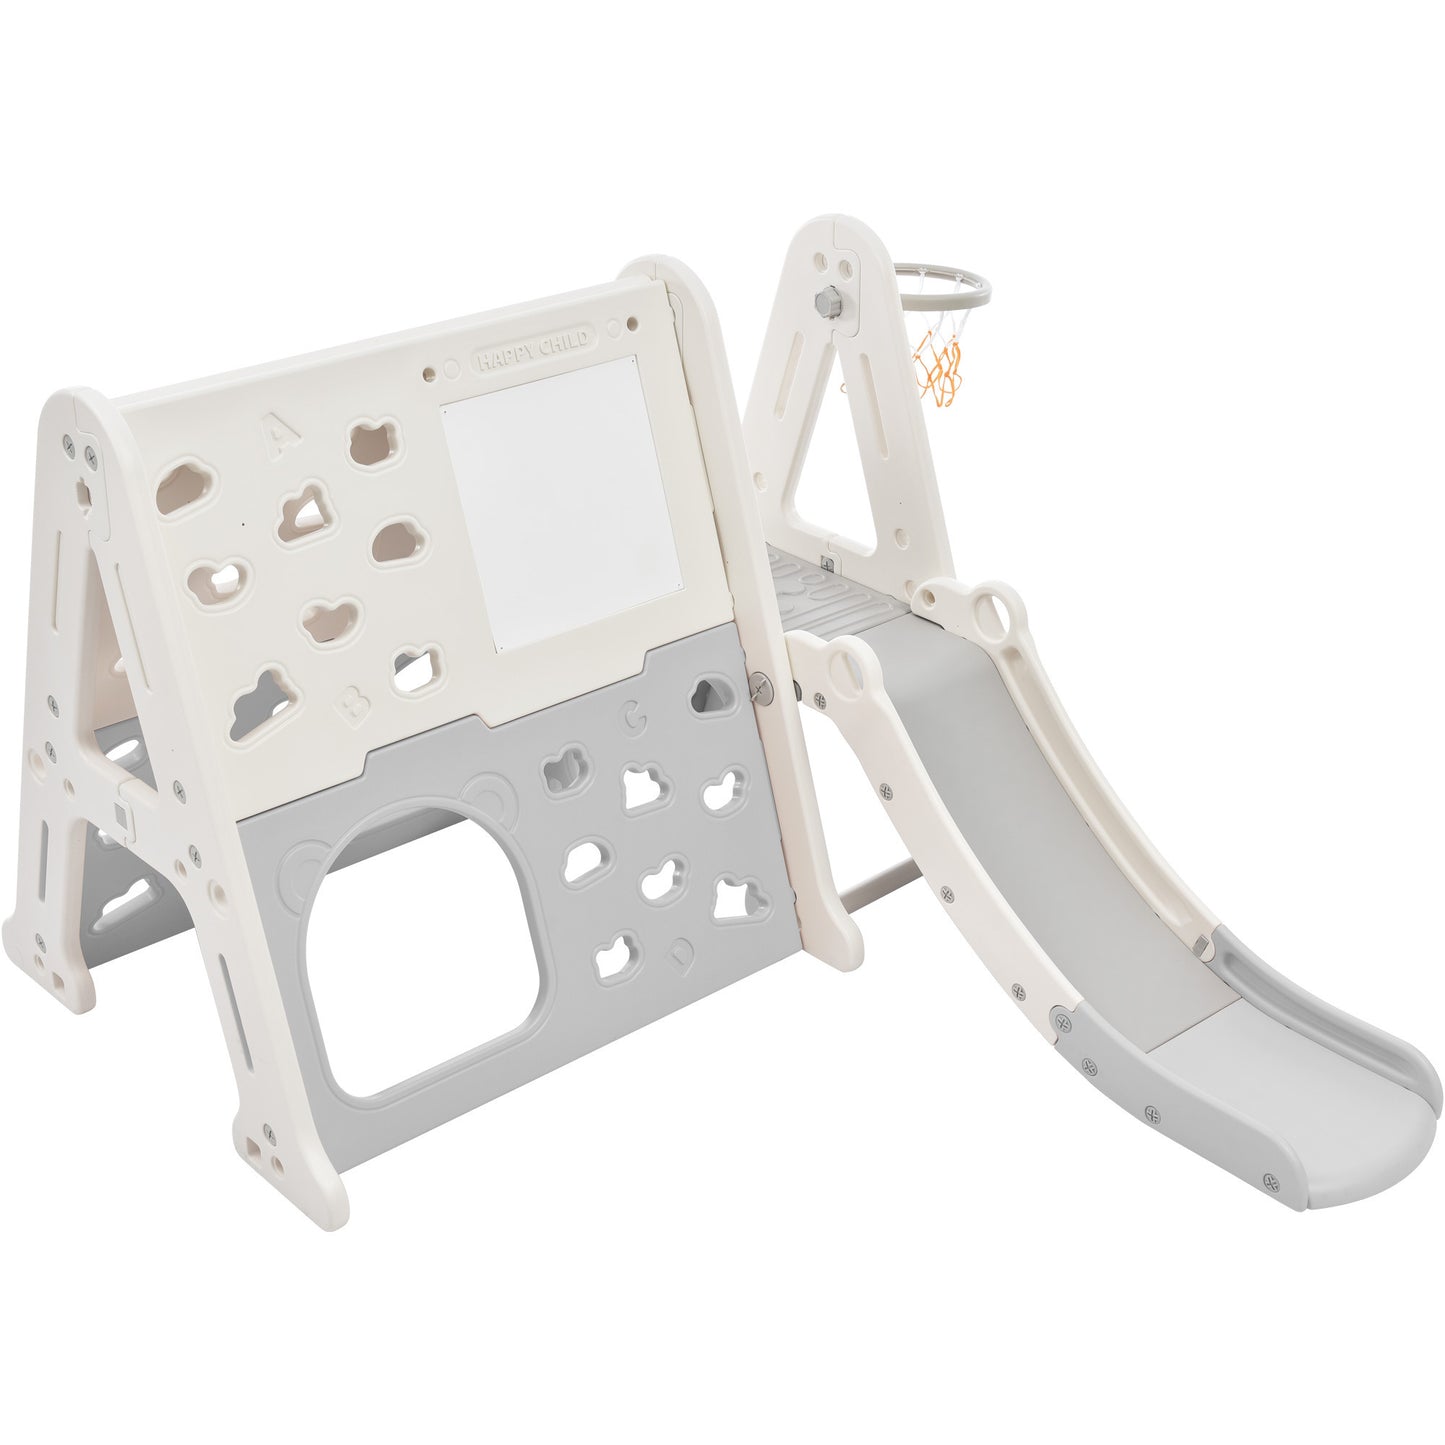 7-in-1 Toddler Climber and Slide Set Kids Playground Climber Slide Playset with Tunnel, Climber, Whiteboard,Toy Building Block Baseplates, Basketball Hoop Combination for Babies